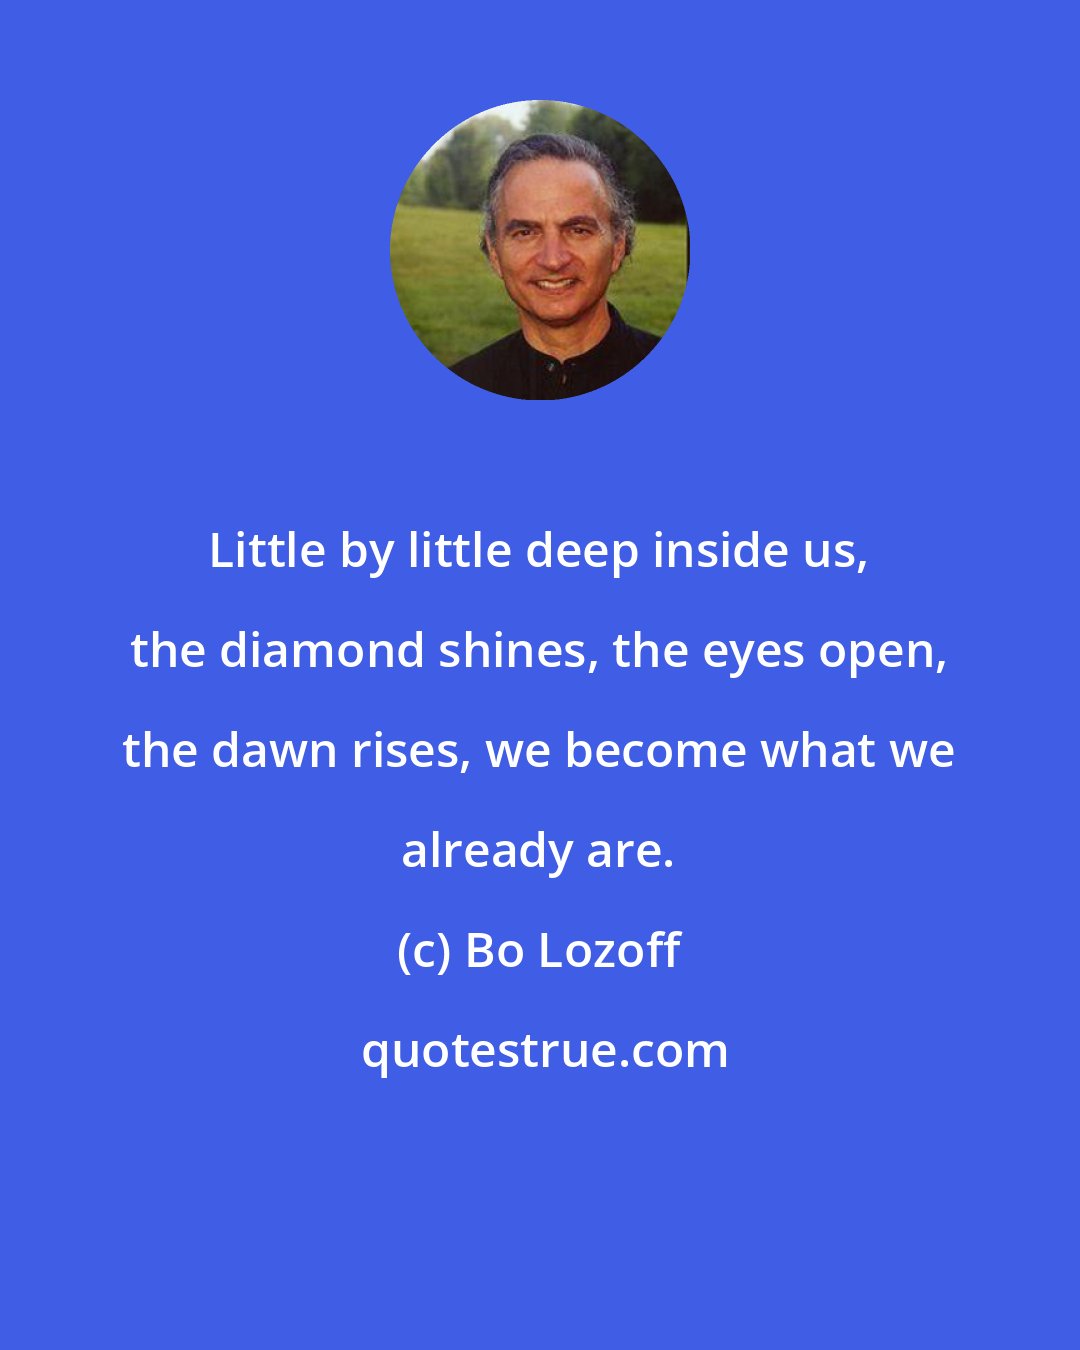 Bo Lozoff: Little by little deep inside us, the diamond shines, the eyes open, the dawn rises, we become what we already are.